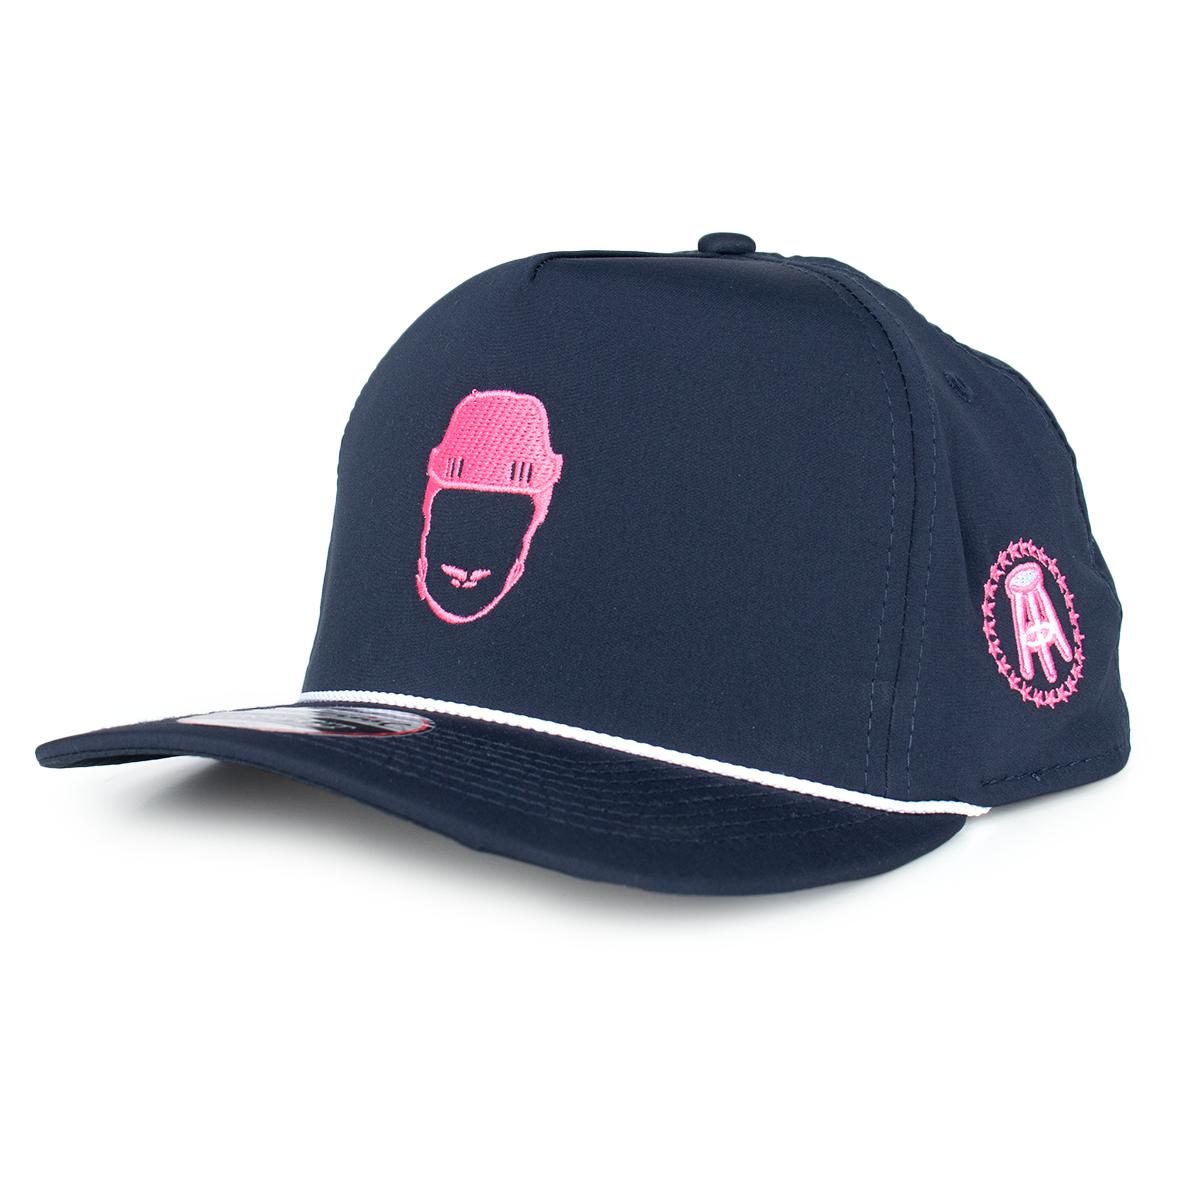 Pink Whitney Helmet Imperial Rope Snapback Hat-Hats-Pink Whitney-Barstool Sports